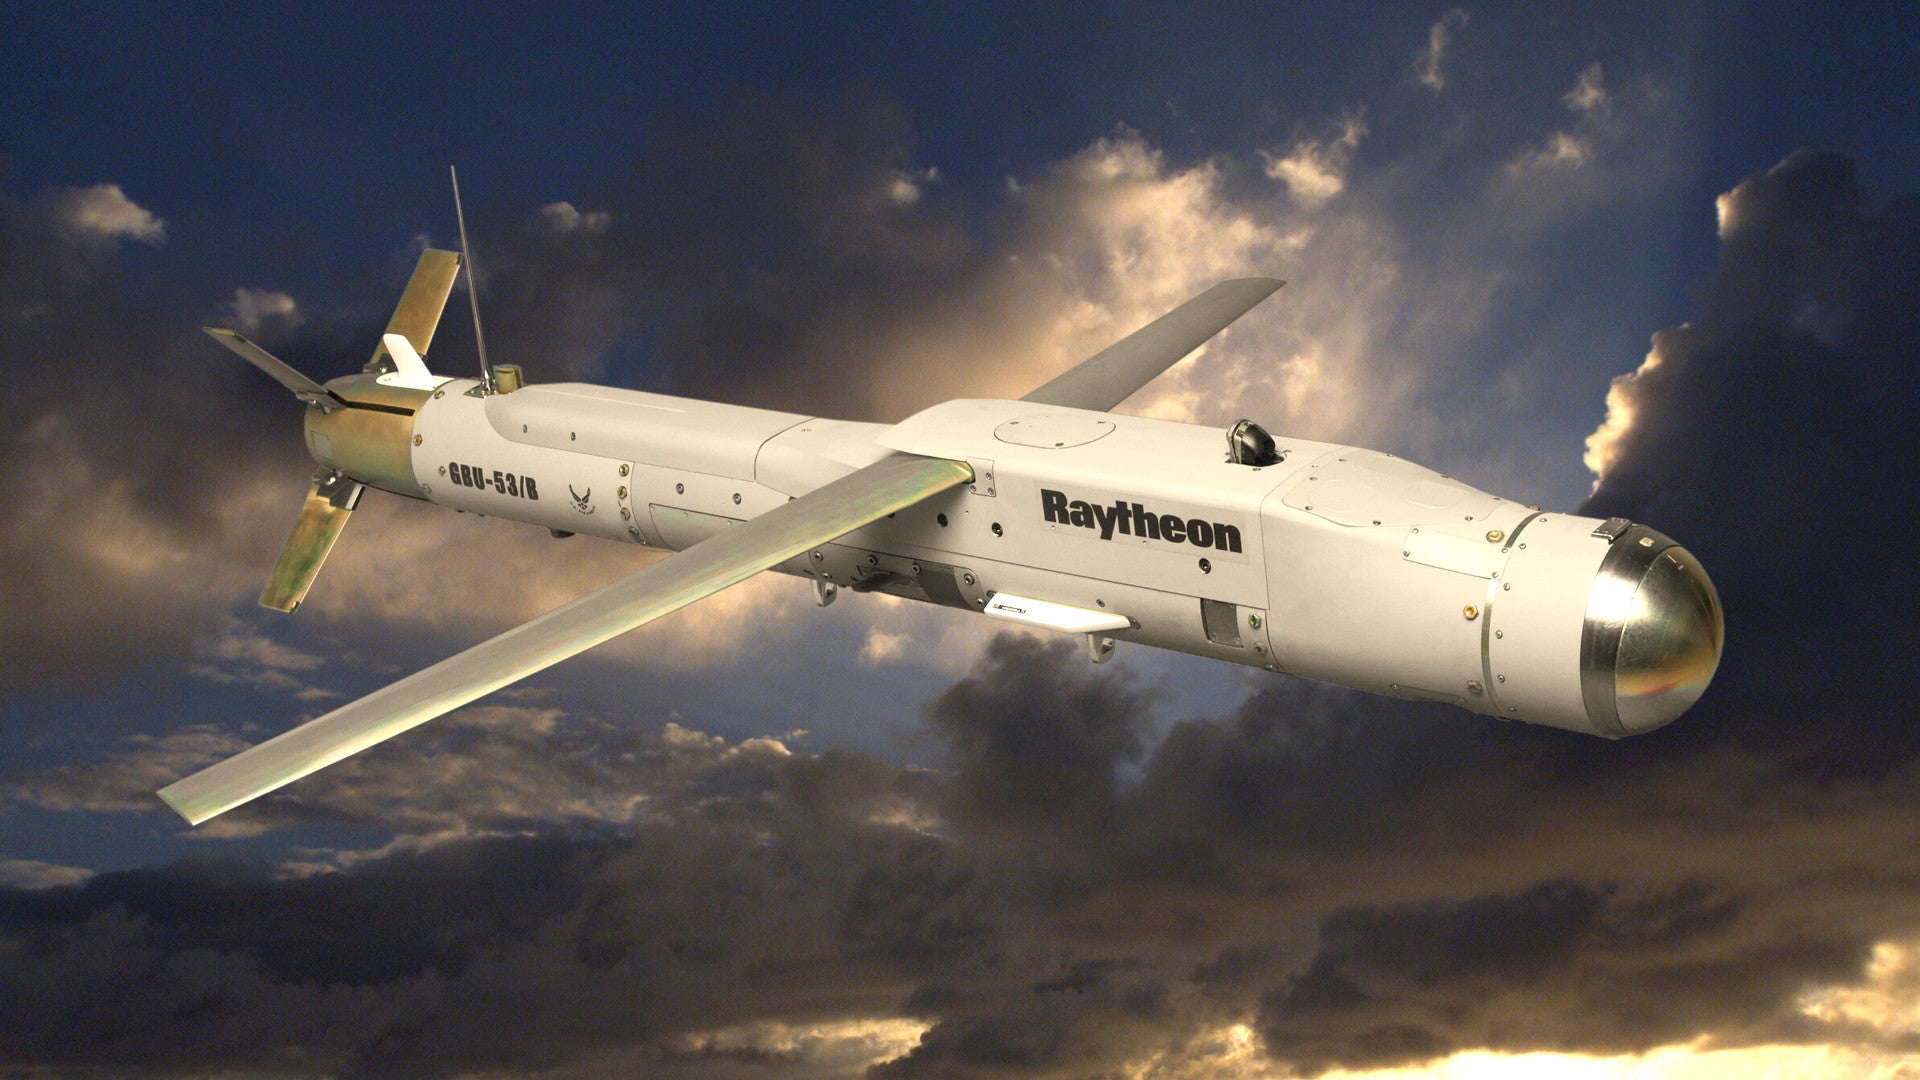 USAF and Raytheon Say Cost Overruns Won’t Slow Delivery of Vital New Bomb